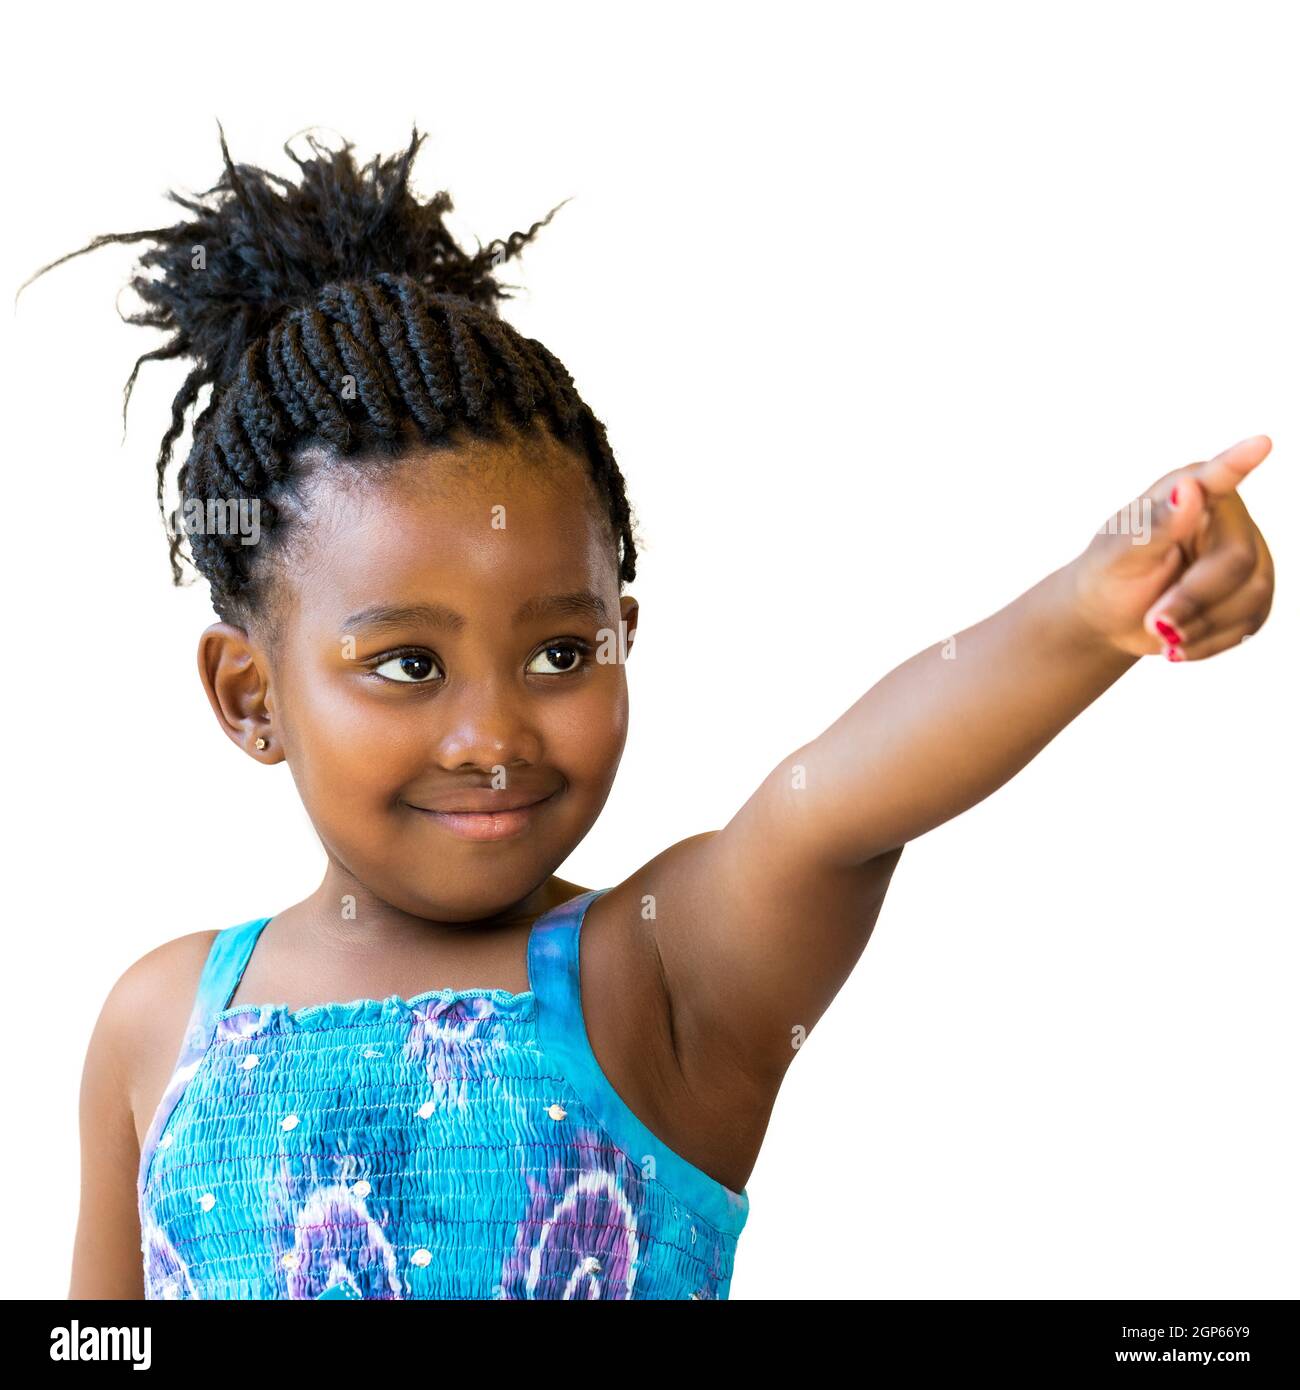 Close up portrait of cute african girl with braided hair pointing with finger at corner.Isolated on white background. Stock Photo